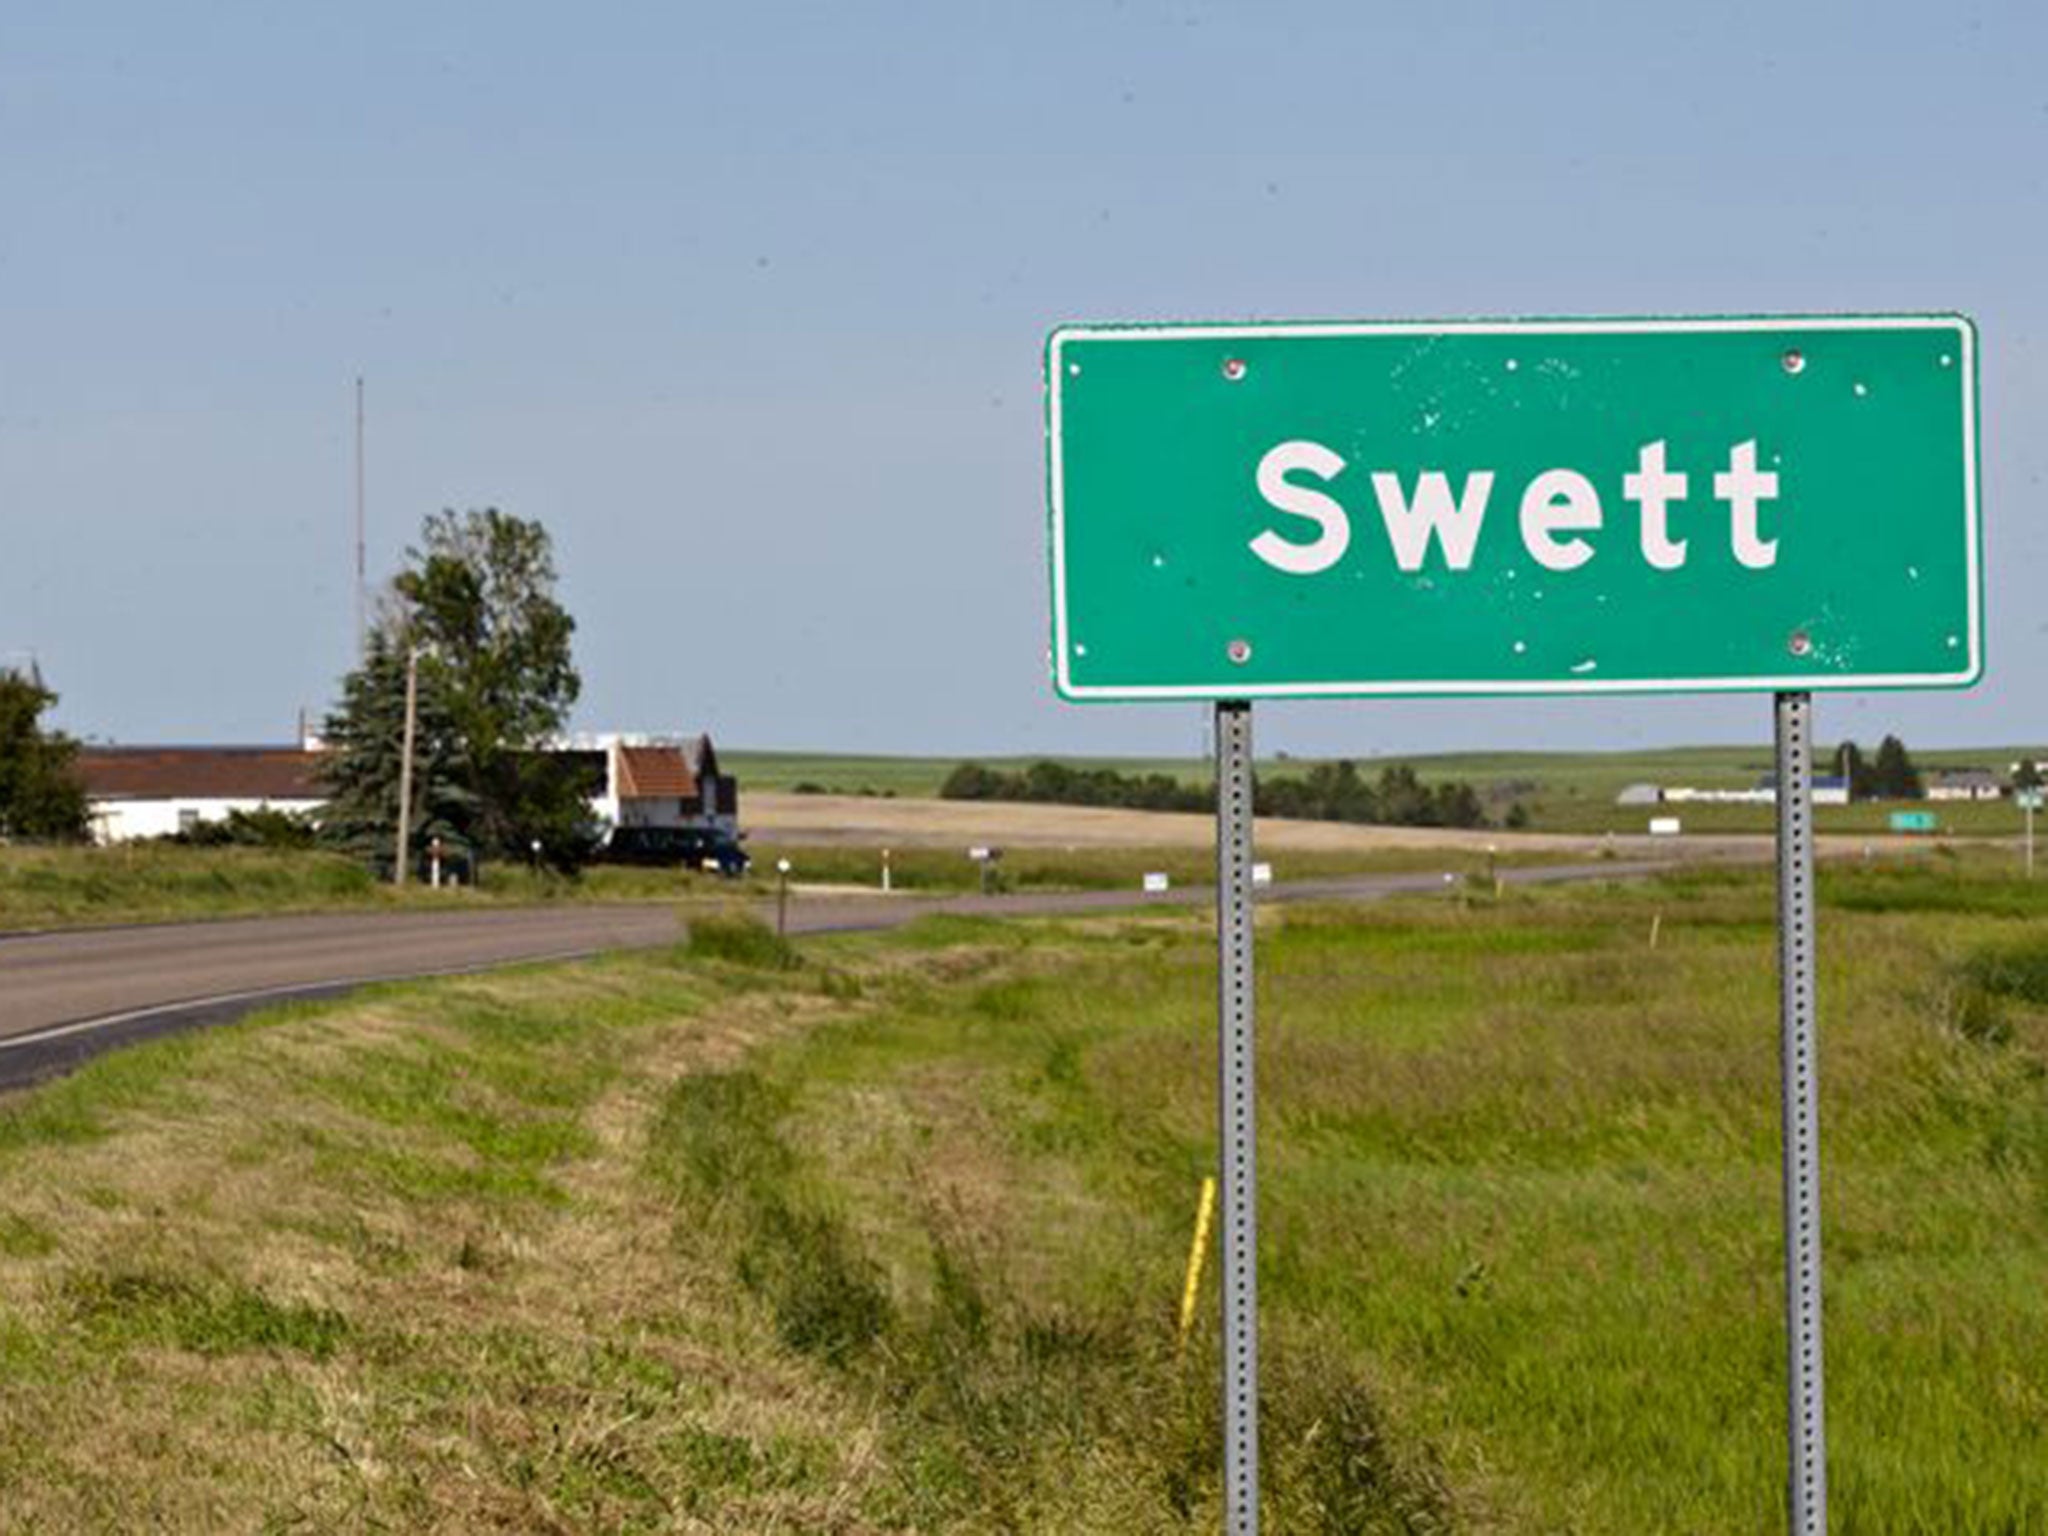 The town in South Dakota is available for just $400,000 (£234,538)